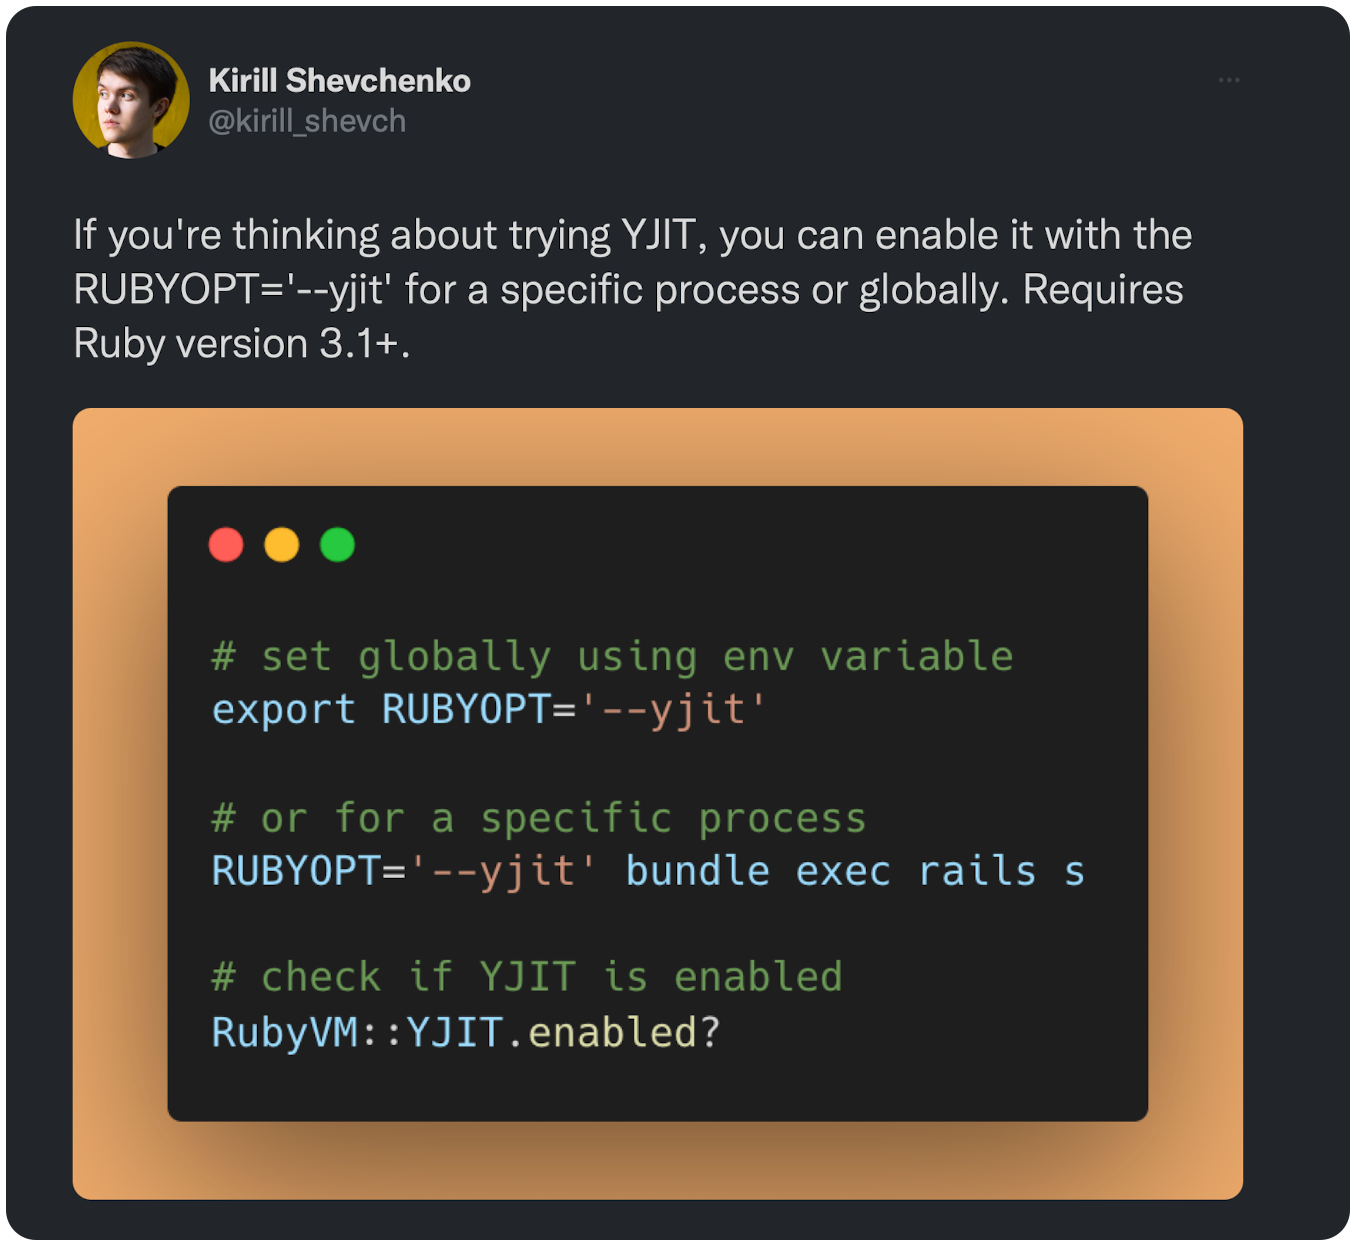 If you're thinking about trying YJIT, you can enable it with the RUBYOPT='--yjit' for a specific process or globally. Requires Ruby version 3.1+. 